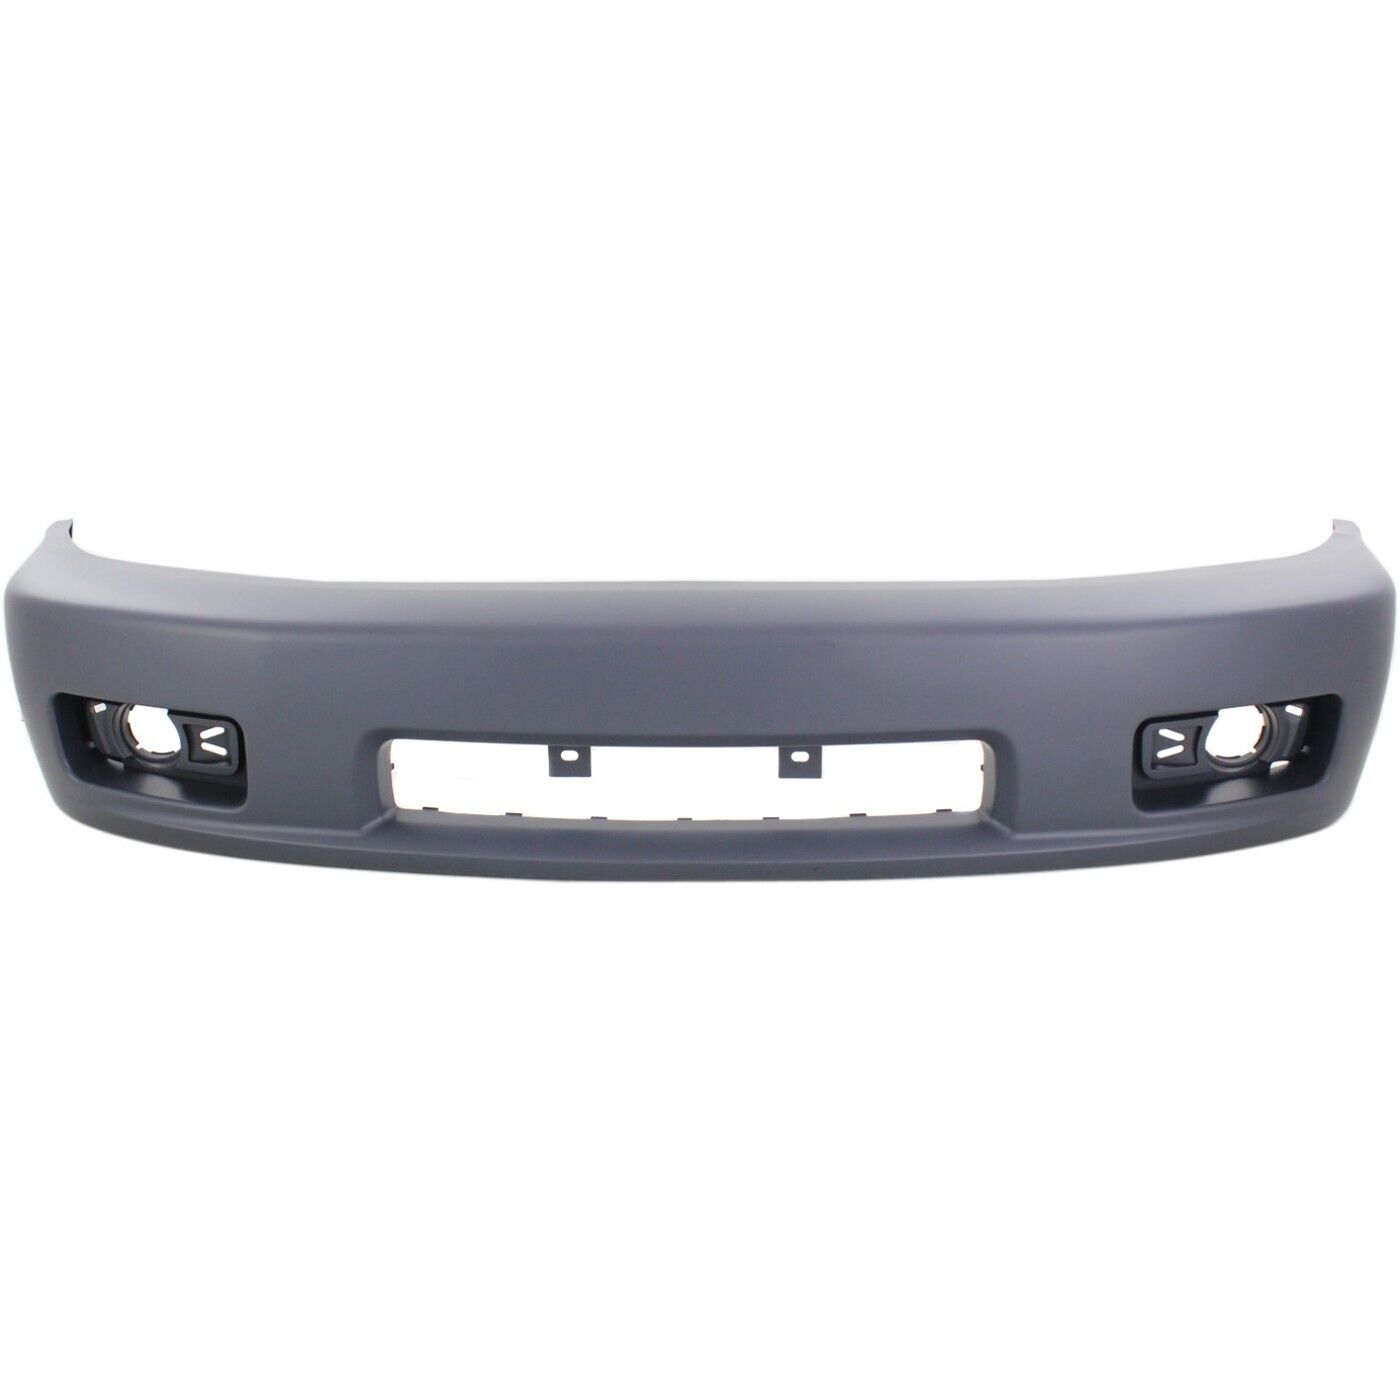 Front Bumper Cover For 2005-2008 Chevy Colorado w/ fog lamp holes Primed